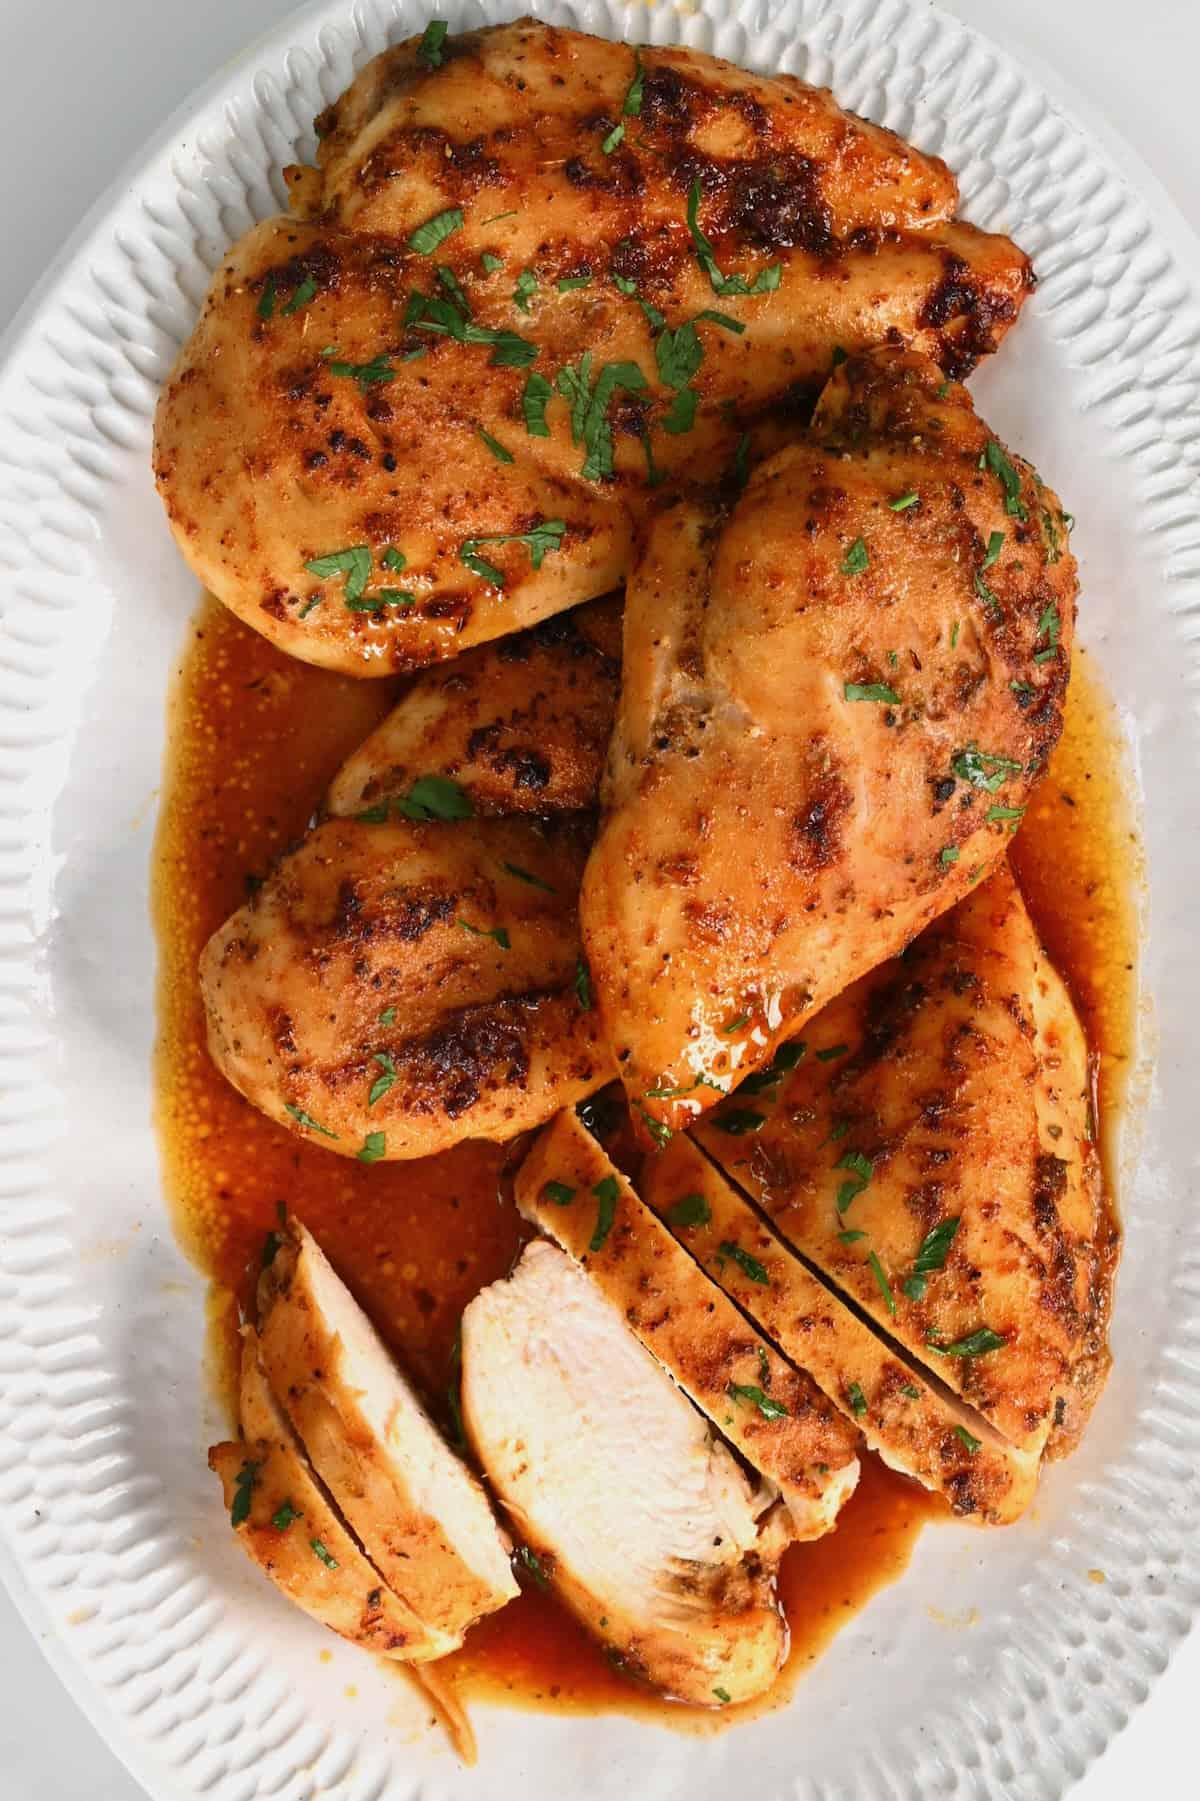 https://www.alphafoodie.com/wp-content/uploads/2022/08/Baked-Chicken-Breast-Baked-chicken-on-a-plate.jpeg